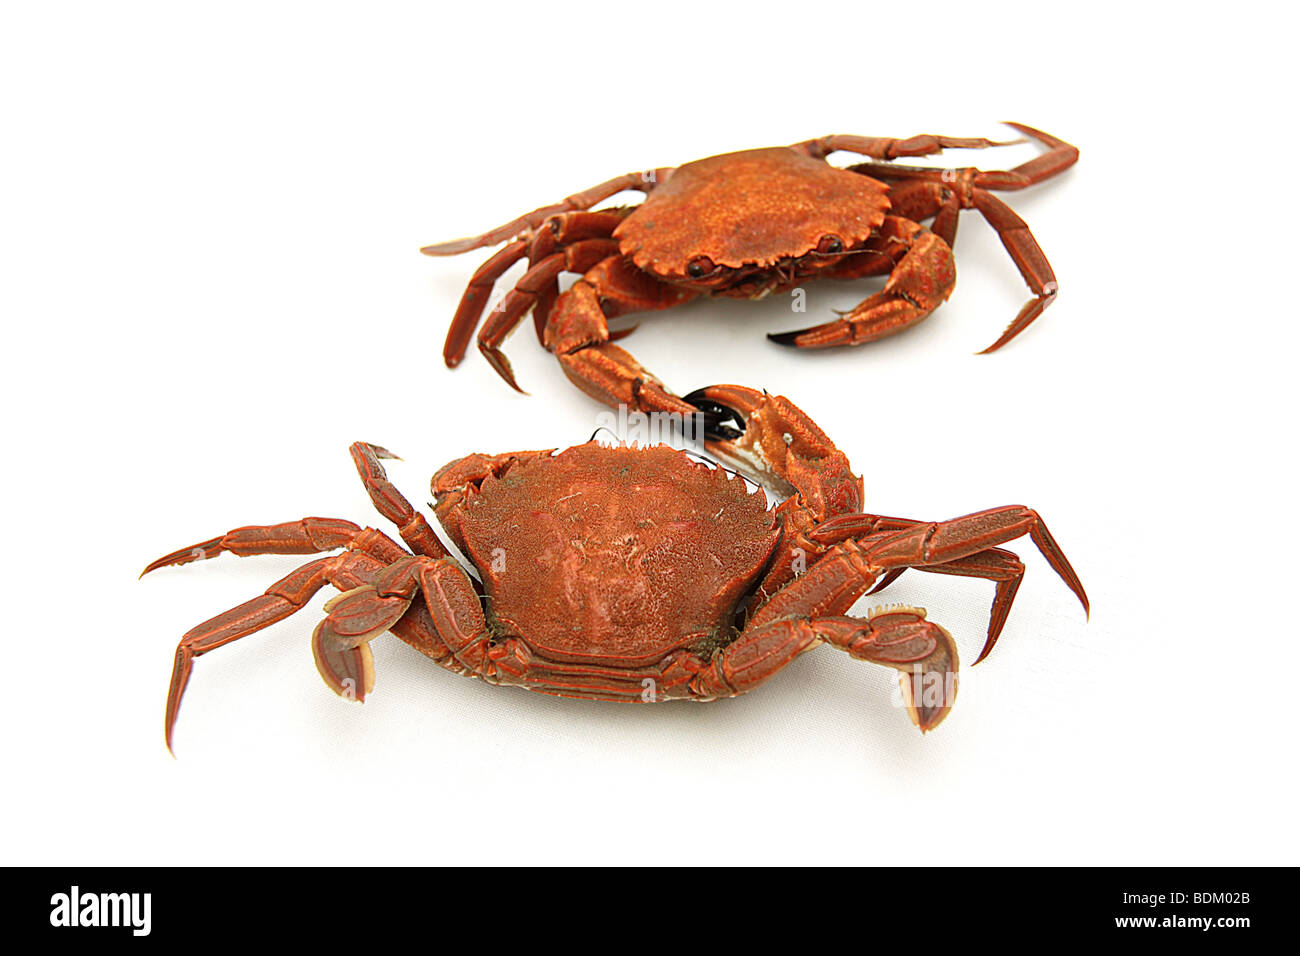 two little crabs shaking hands before fighting on isolated background Stock Photo